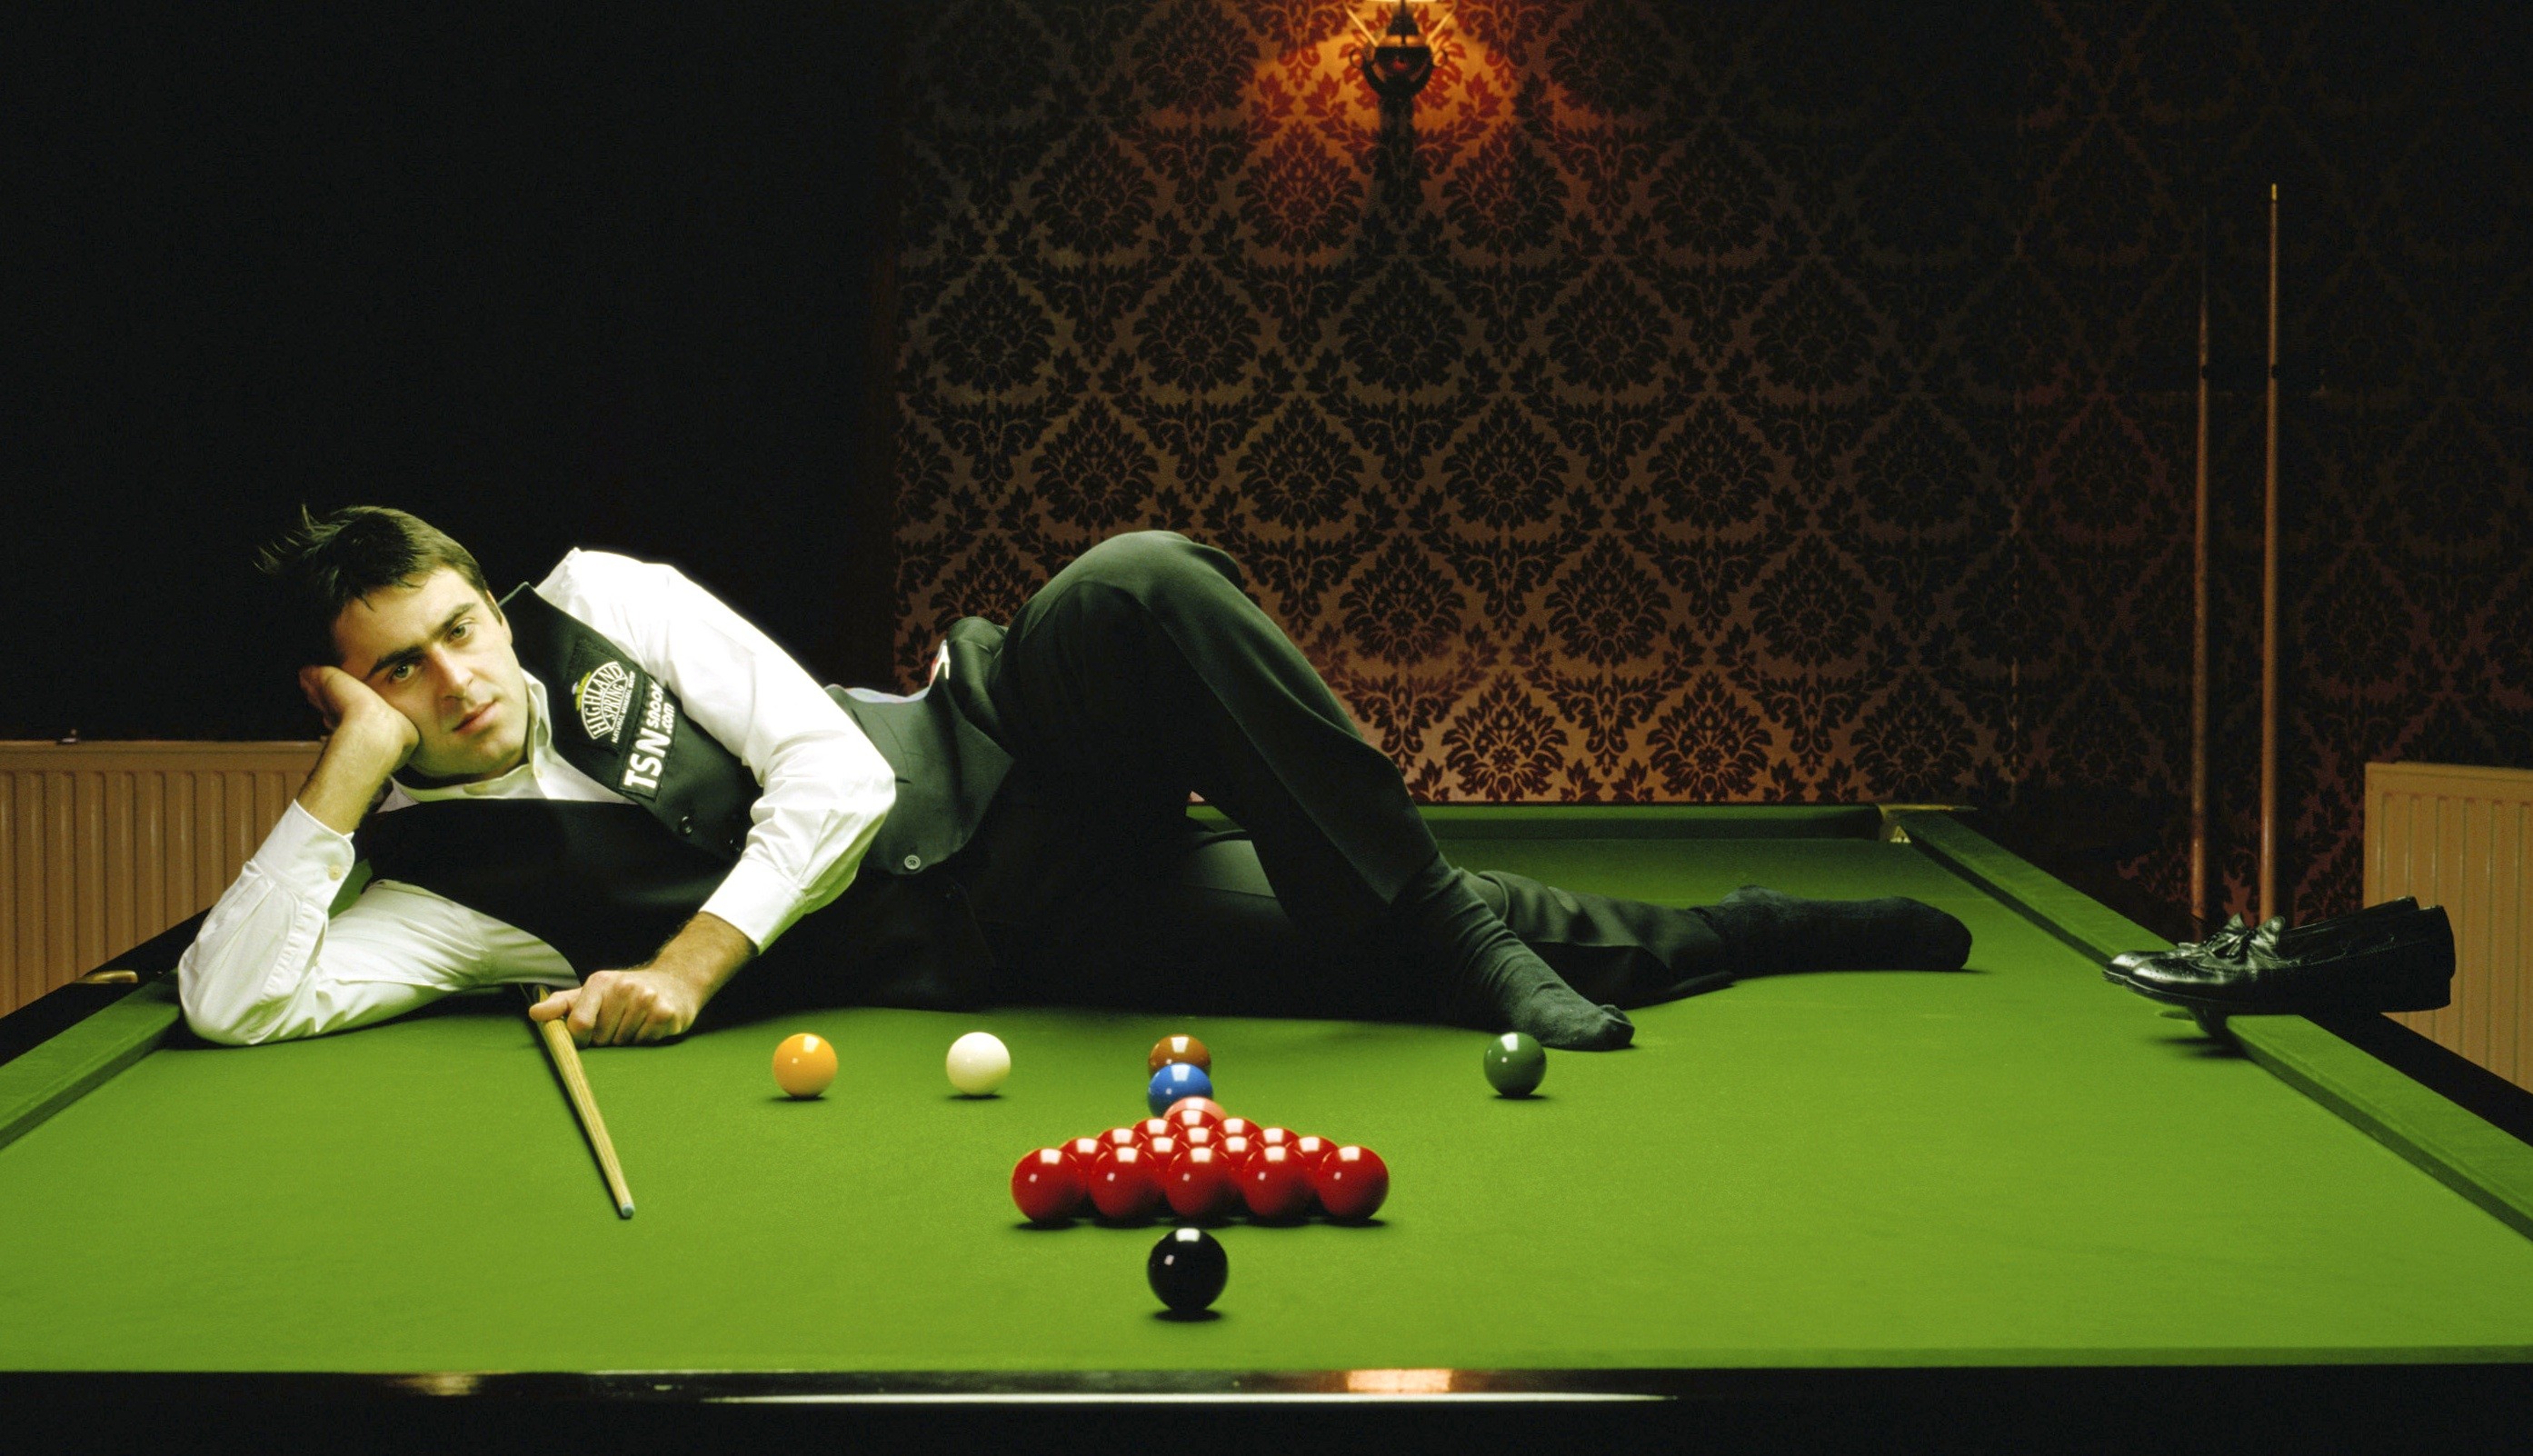 People 2787x1602 Snooker sport ball billiard balls pool table men suits looking at viewer queue Ronnie O'Sullivan humor